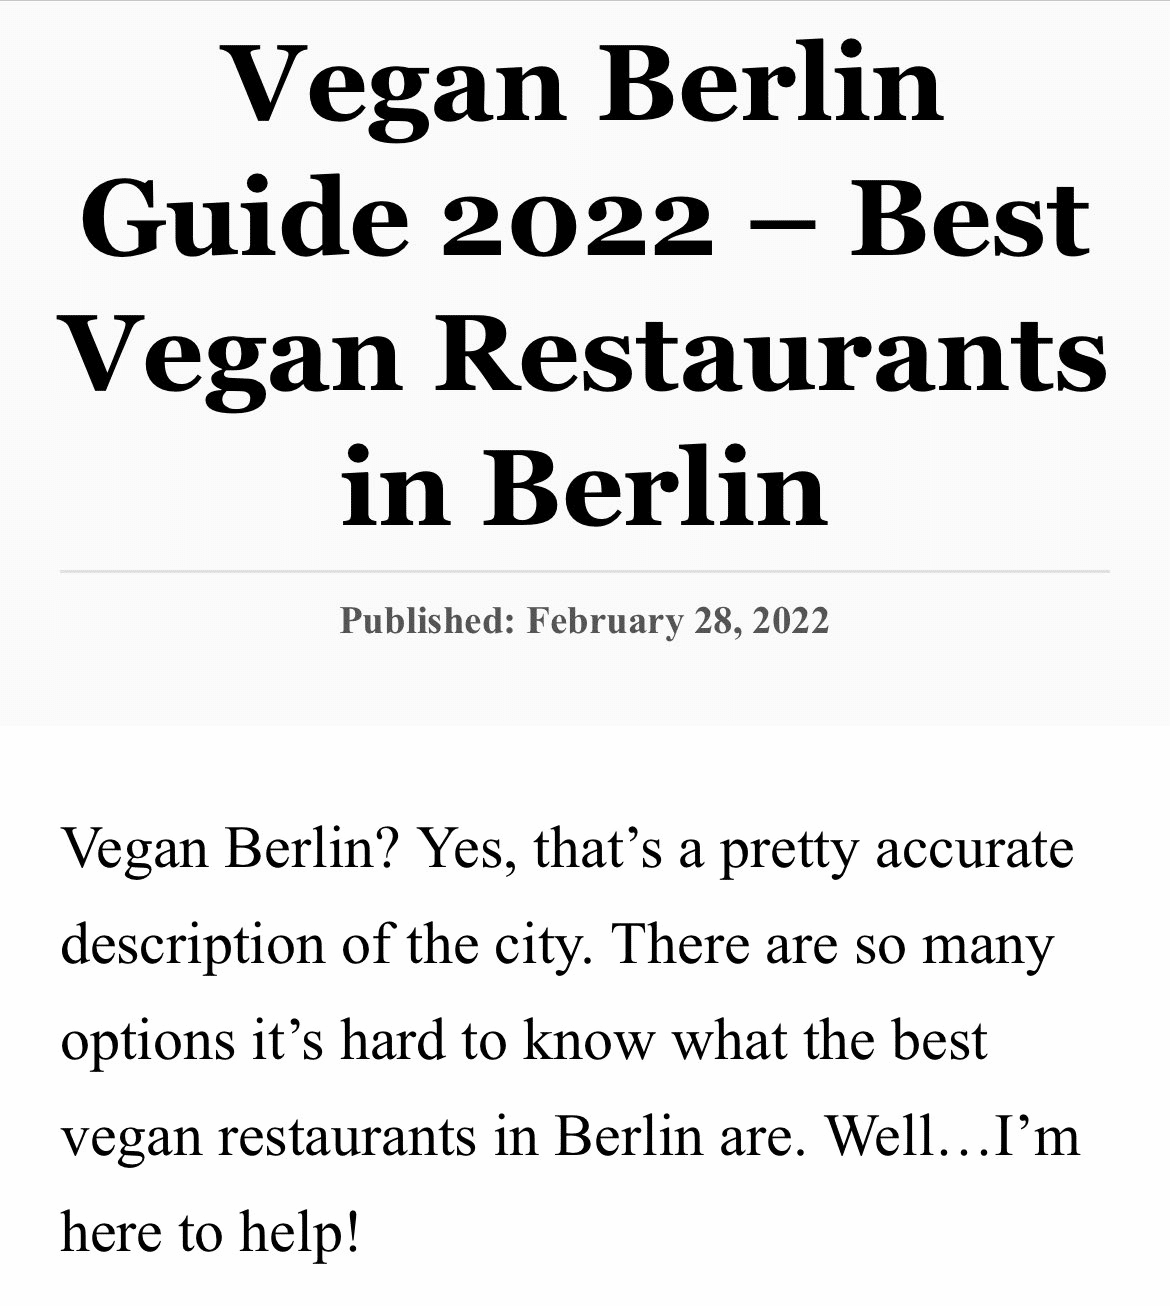 White background with text: Vegan Berlin Guide 2022 - Best Vegan Restaurants in Berlin, Published: February 28, 2022, Vegan Berlin? Yes, that's a pretty accurate description of the city. There are so many options it's hard to know what the best vegan restaurants in Berlin are. Well... I'm here to help!